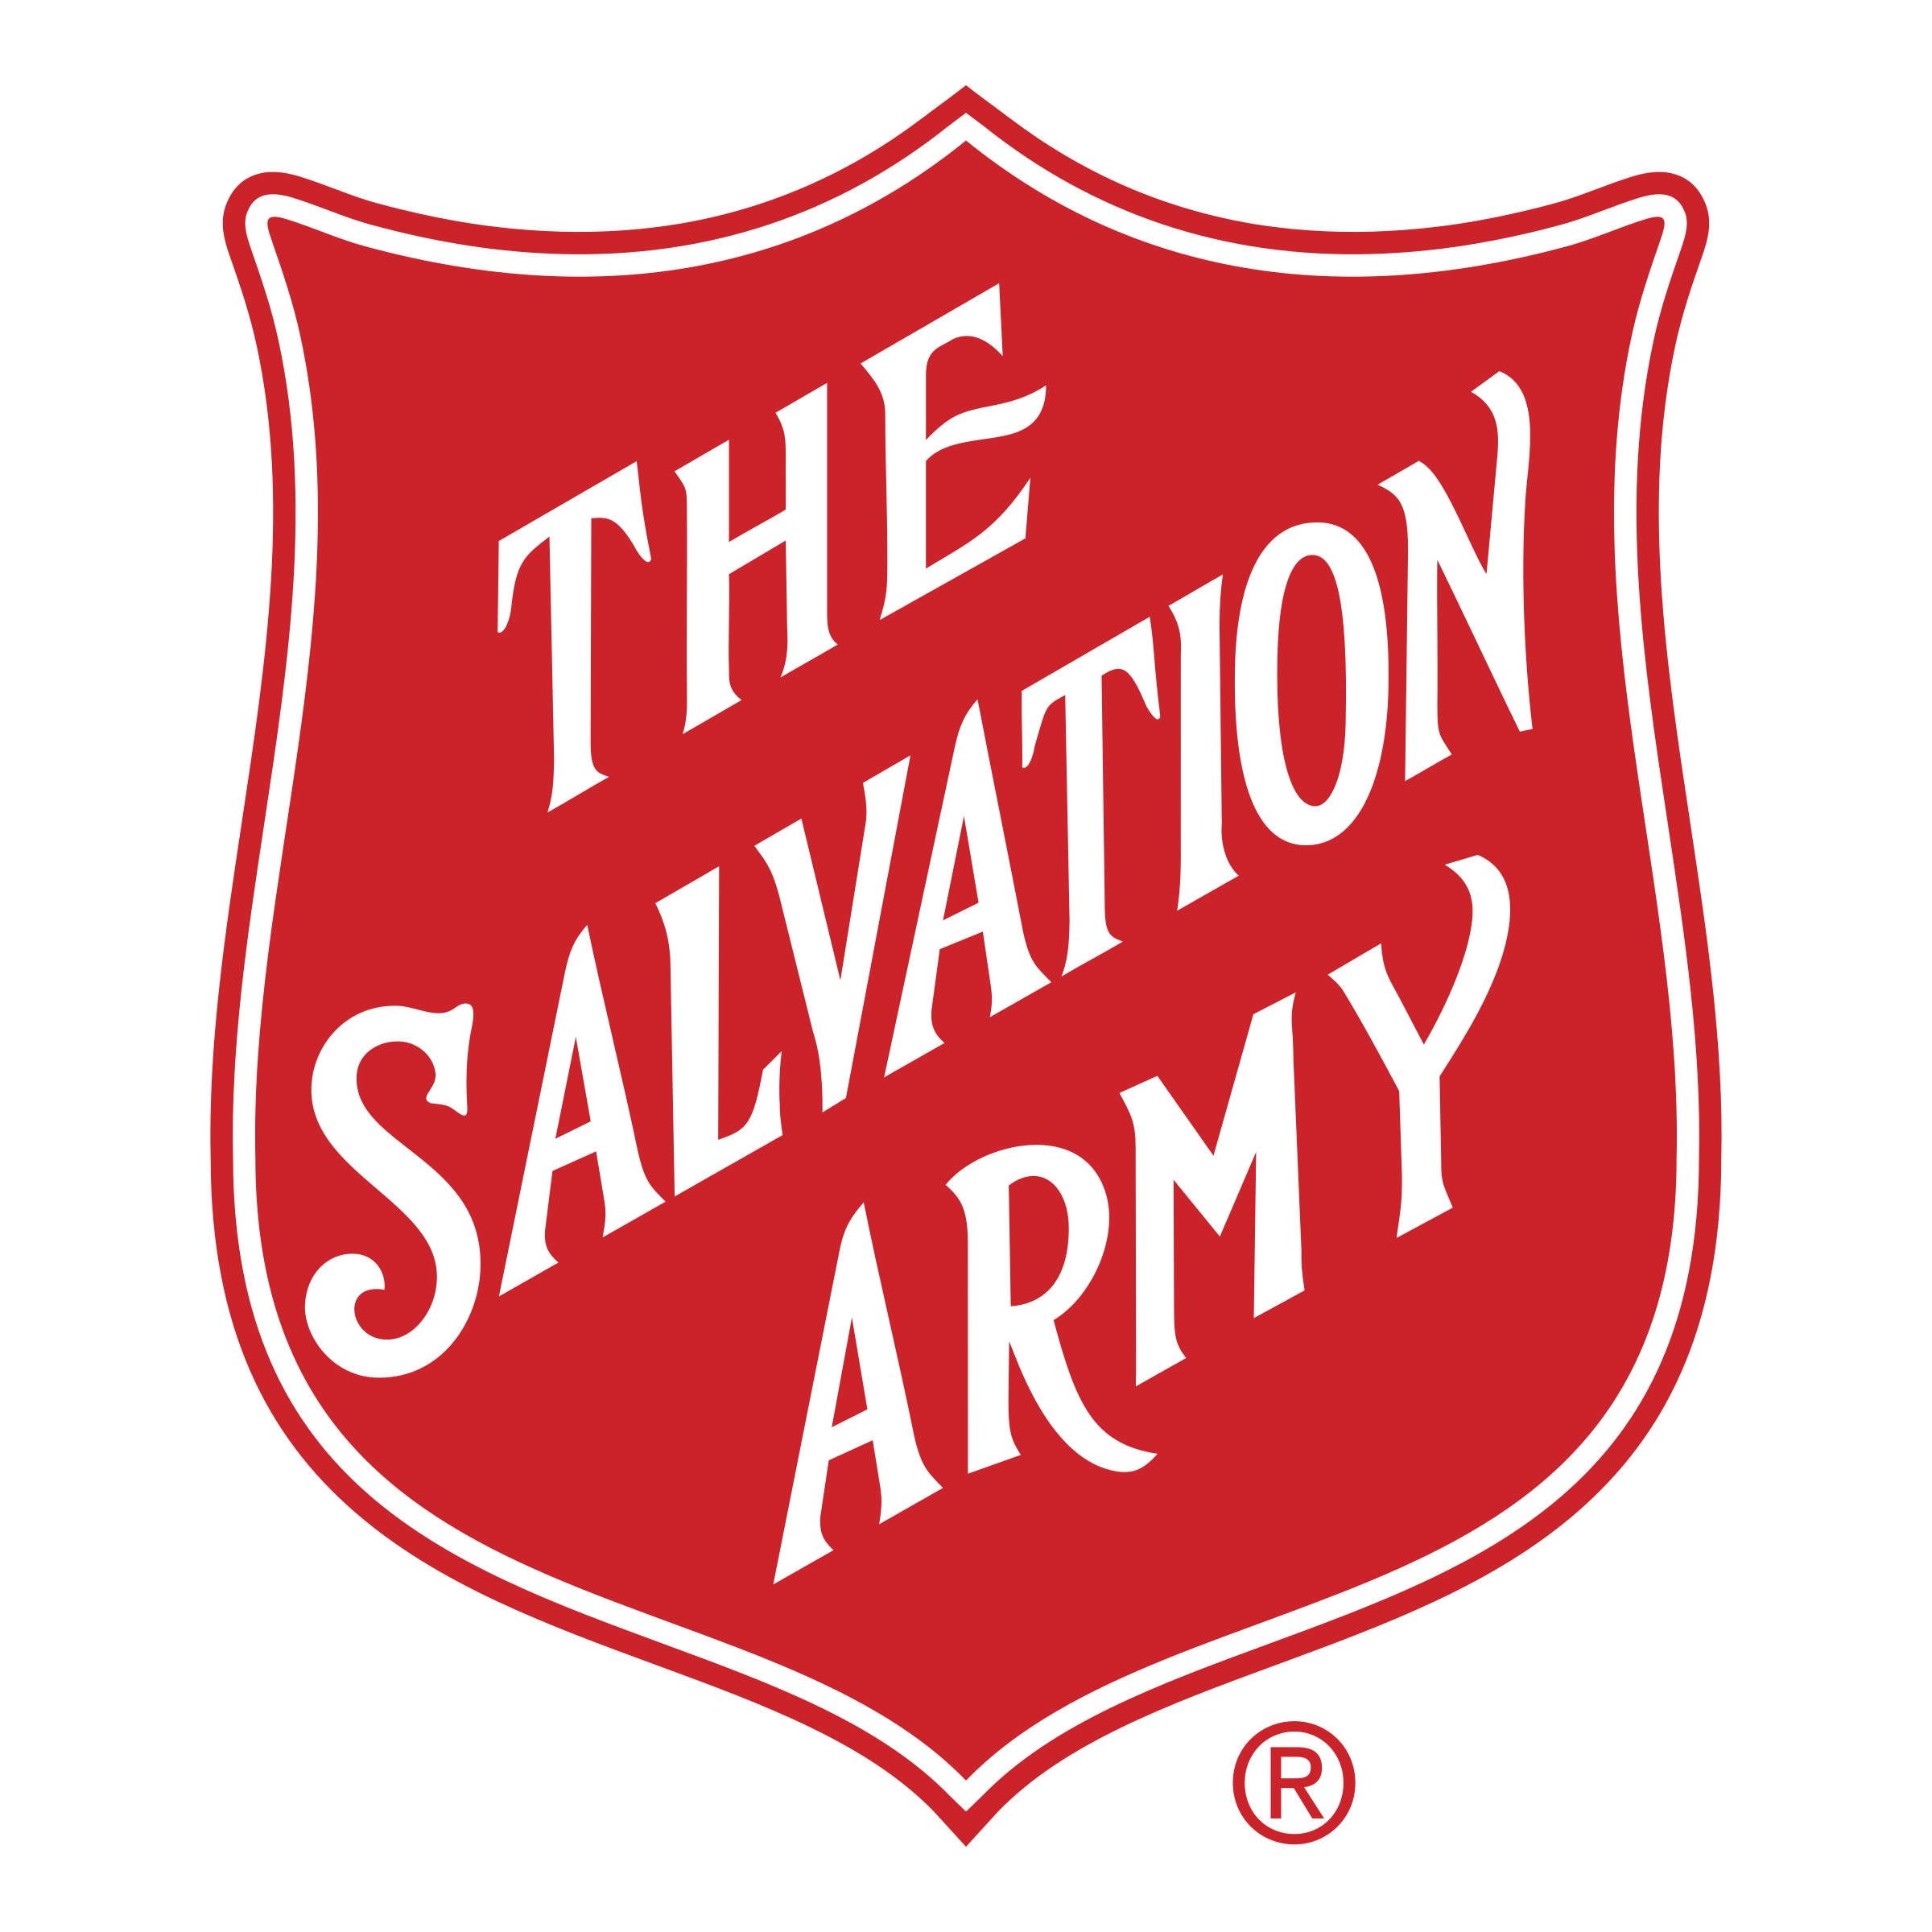 Click here to visit the Salvation Army website.